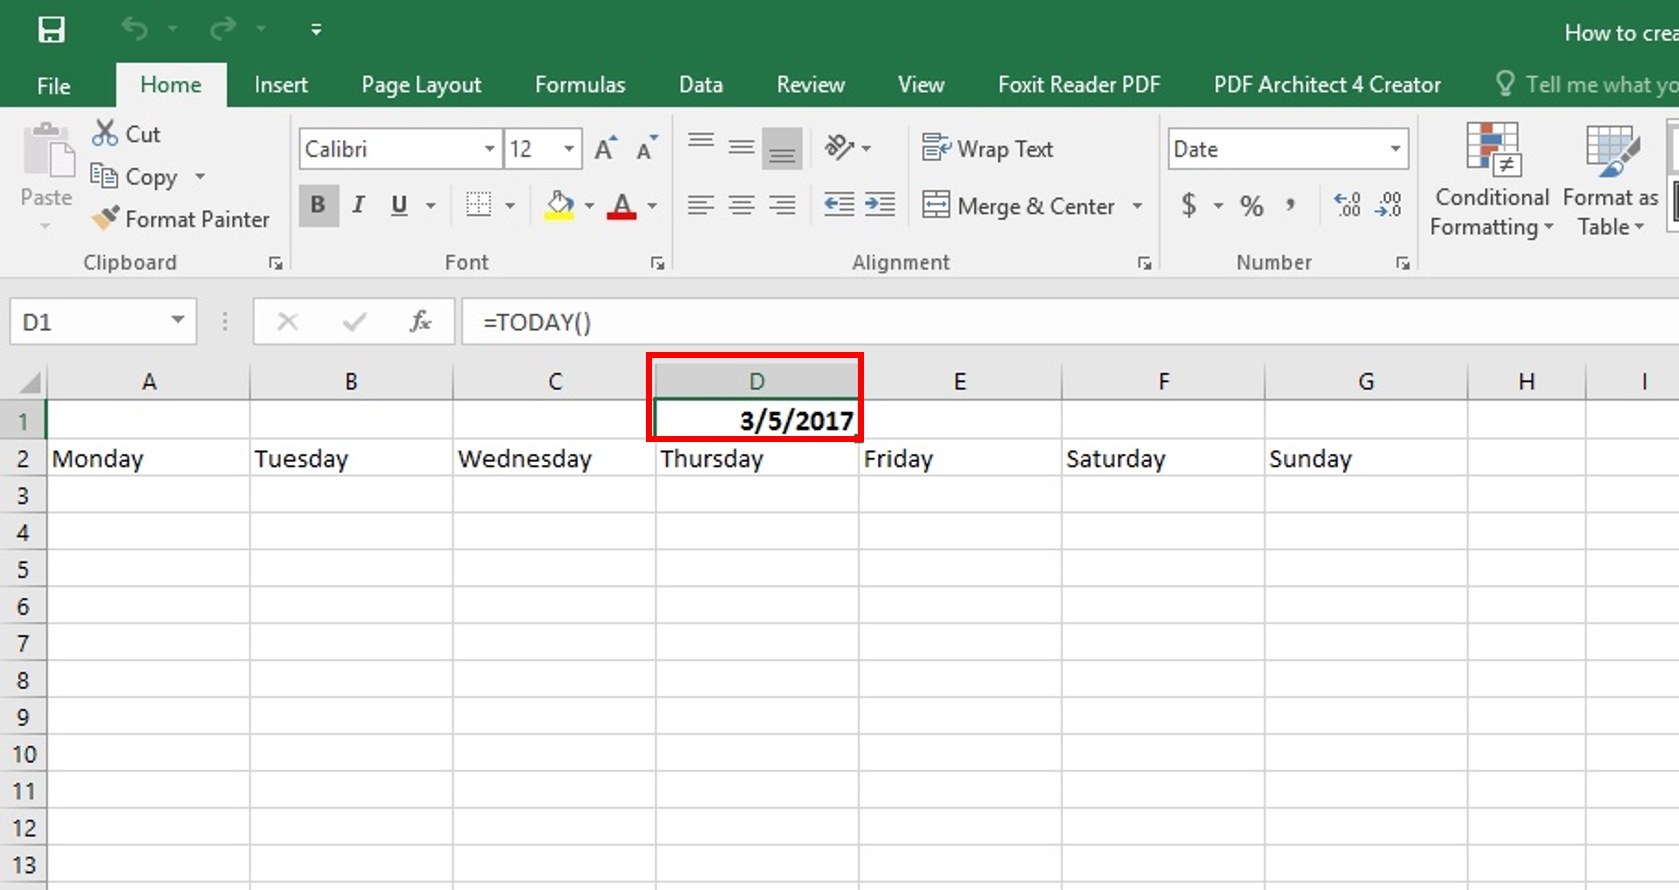 How To Create A Calendar In Excel | Step By Step Process